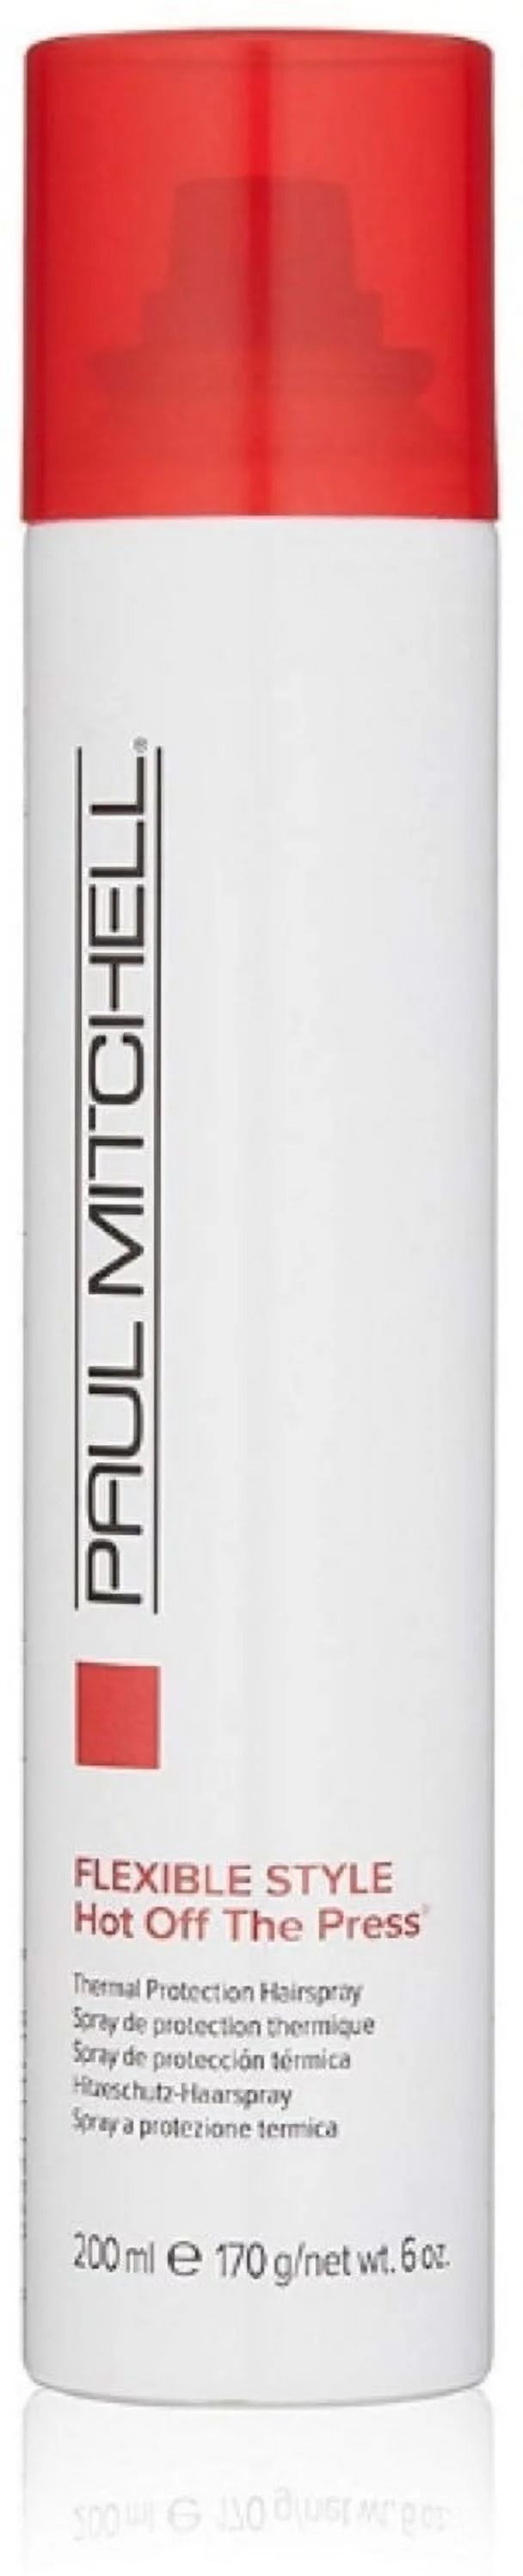 Paul Mitchell Hot Off The Press Thermal Protection Hairspray, 6 Oz | Walmart (US)